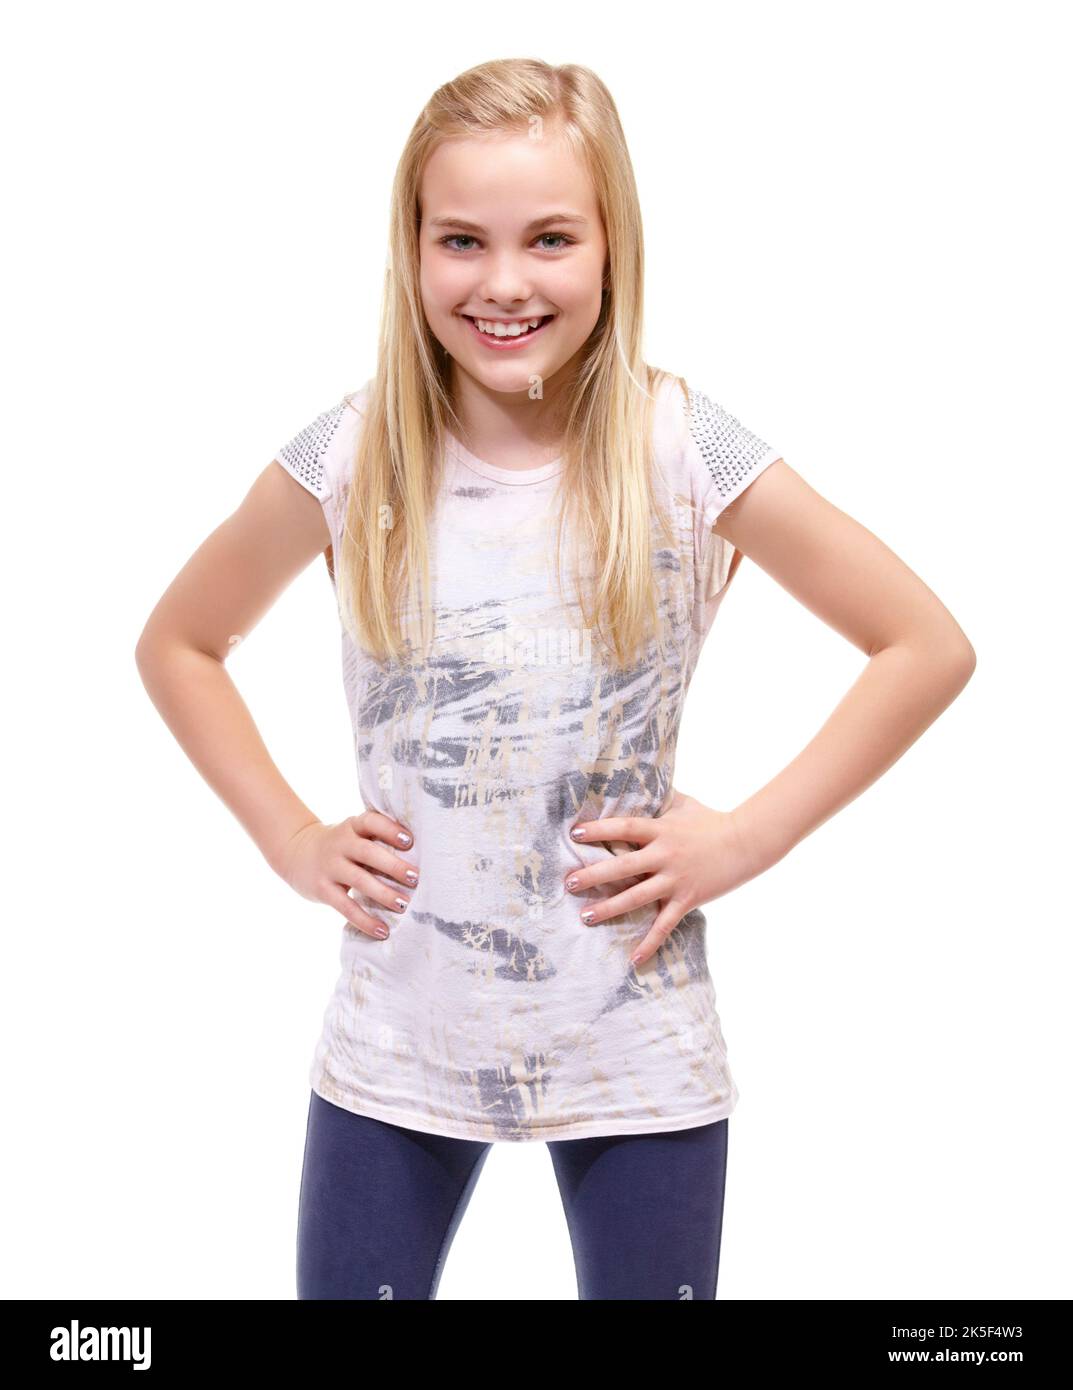 Shes got confidence. Young girl posing confidently against a white background. Stock Photo